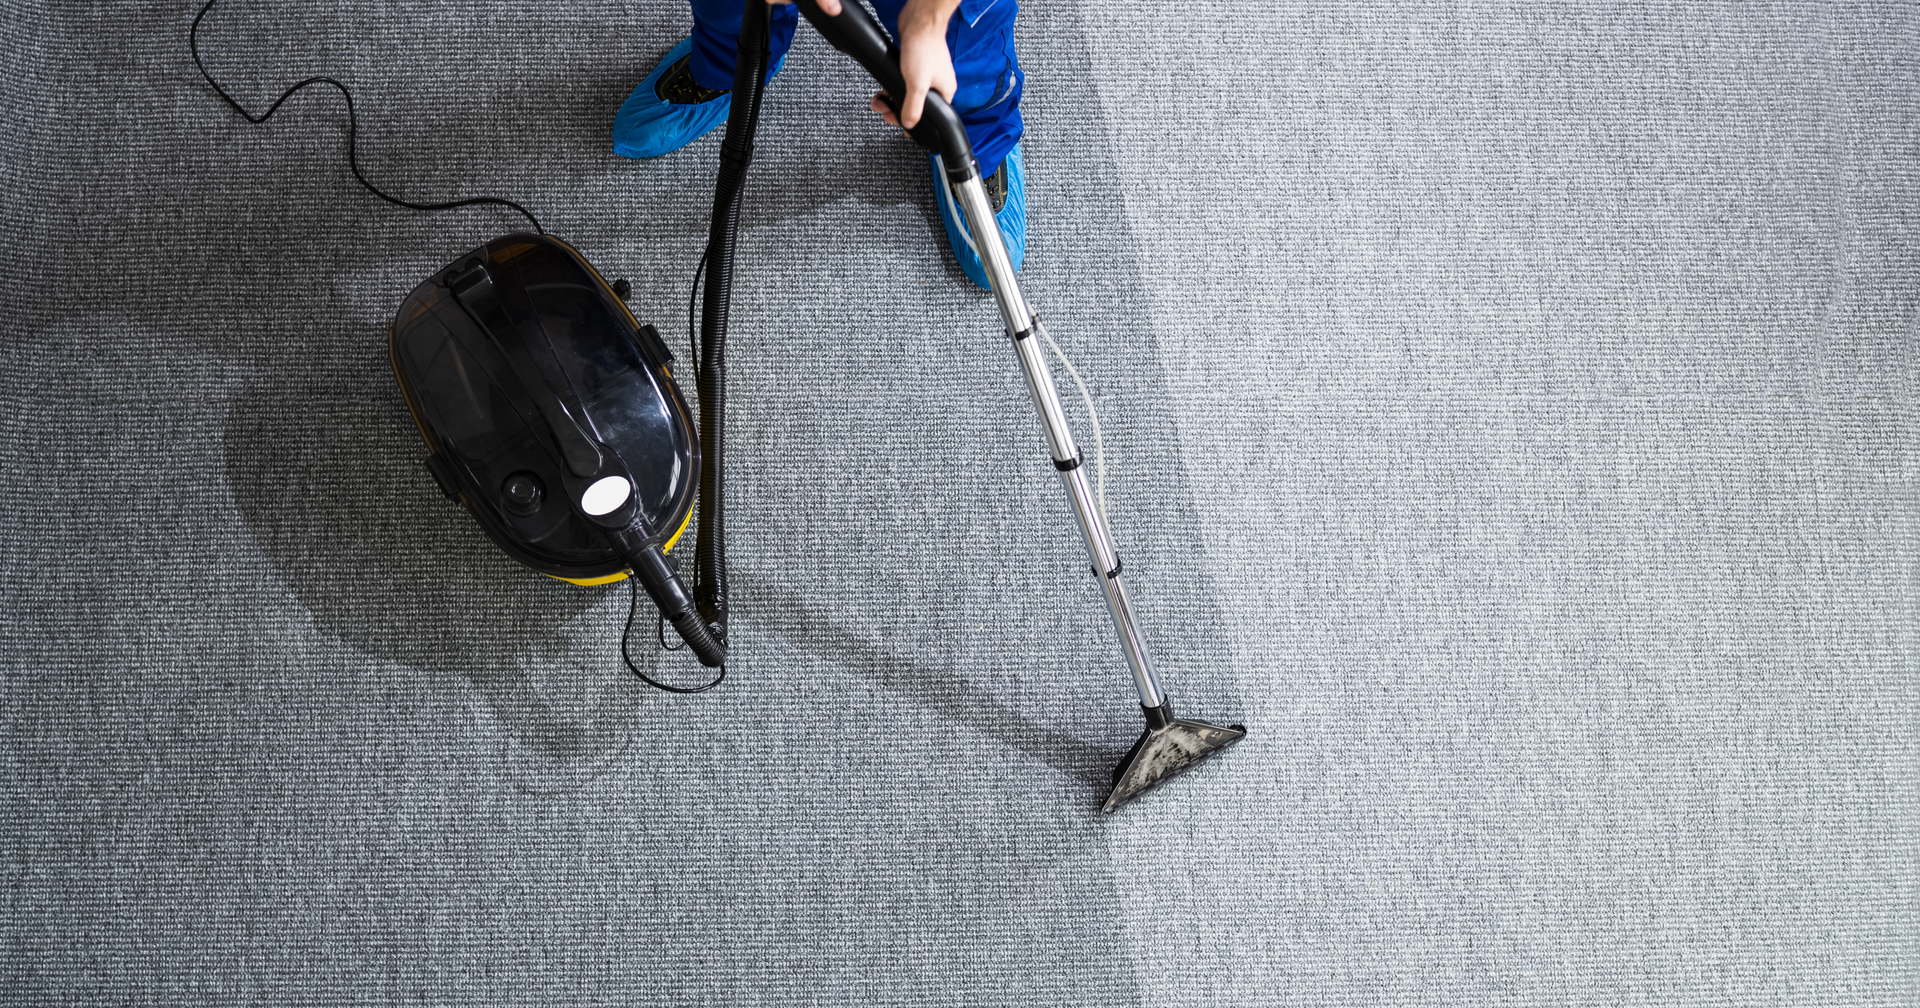 Enhancing Business Success, One Clean Carpet at a Time